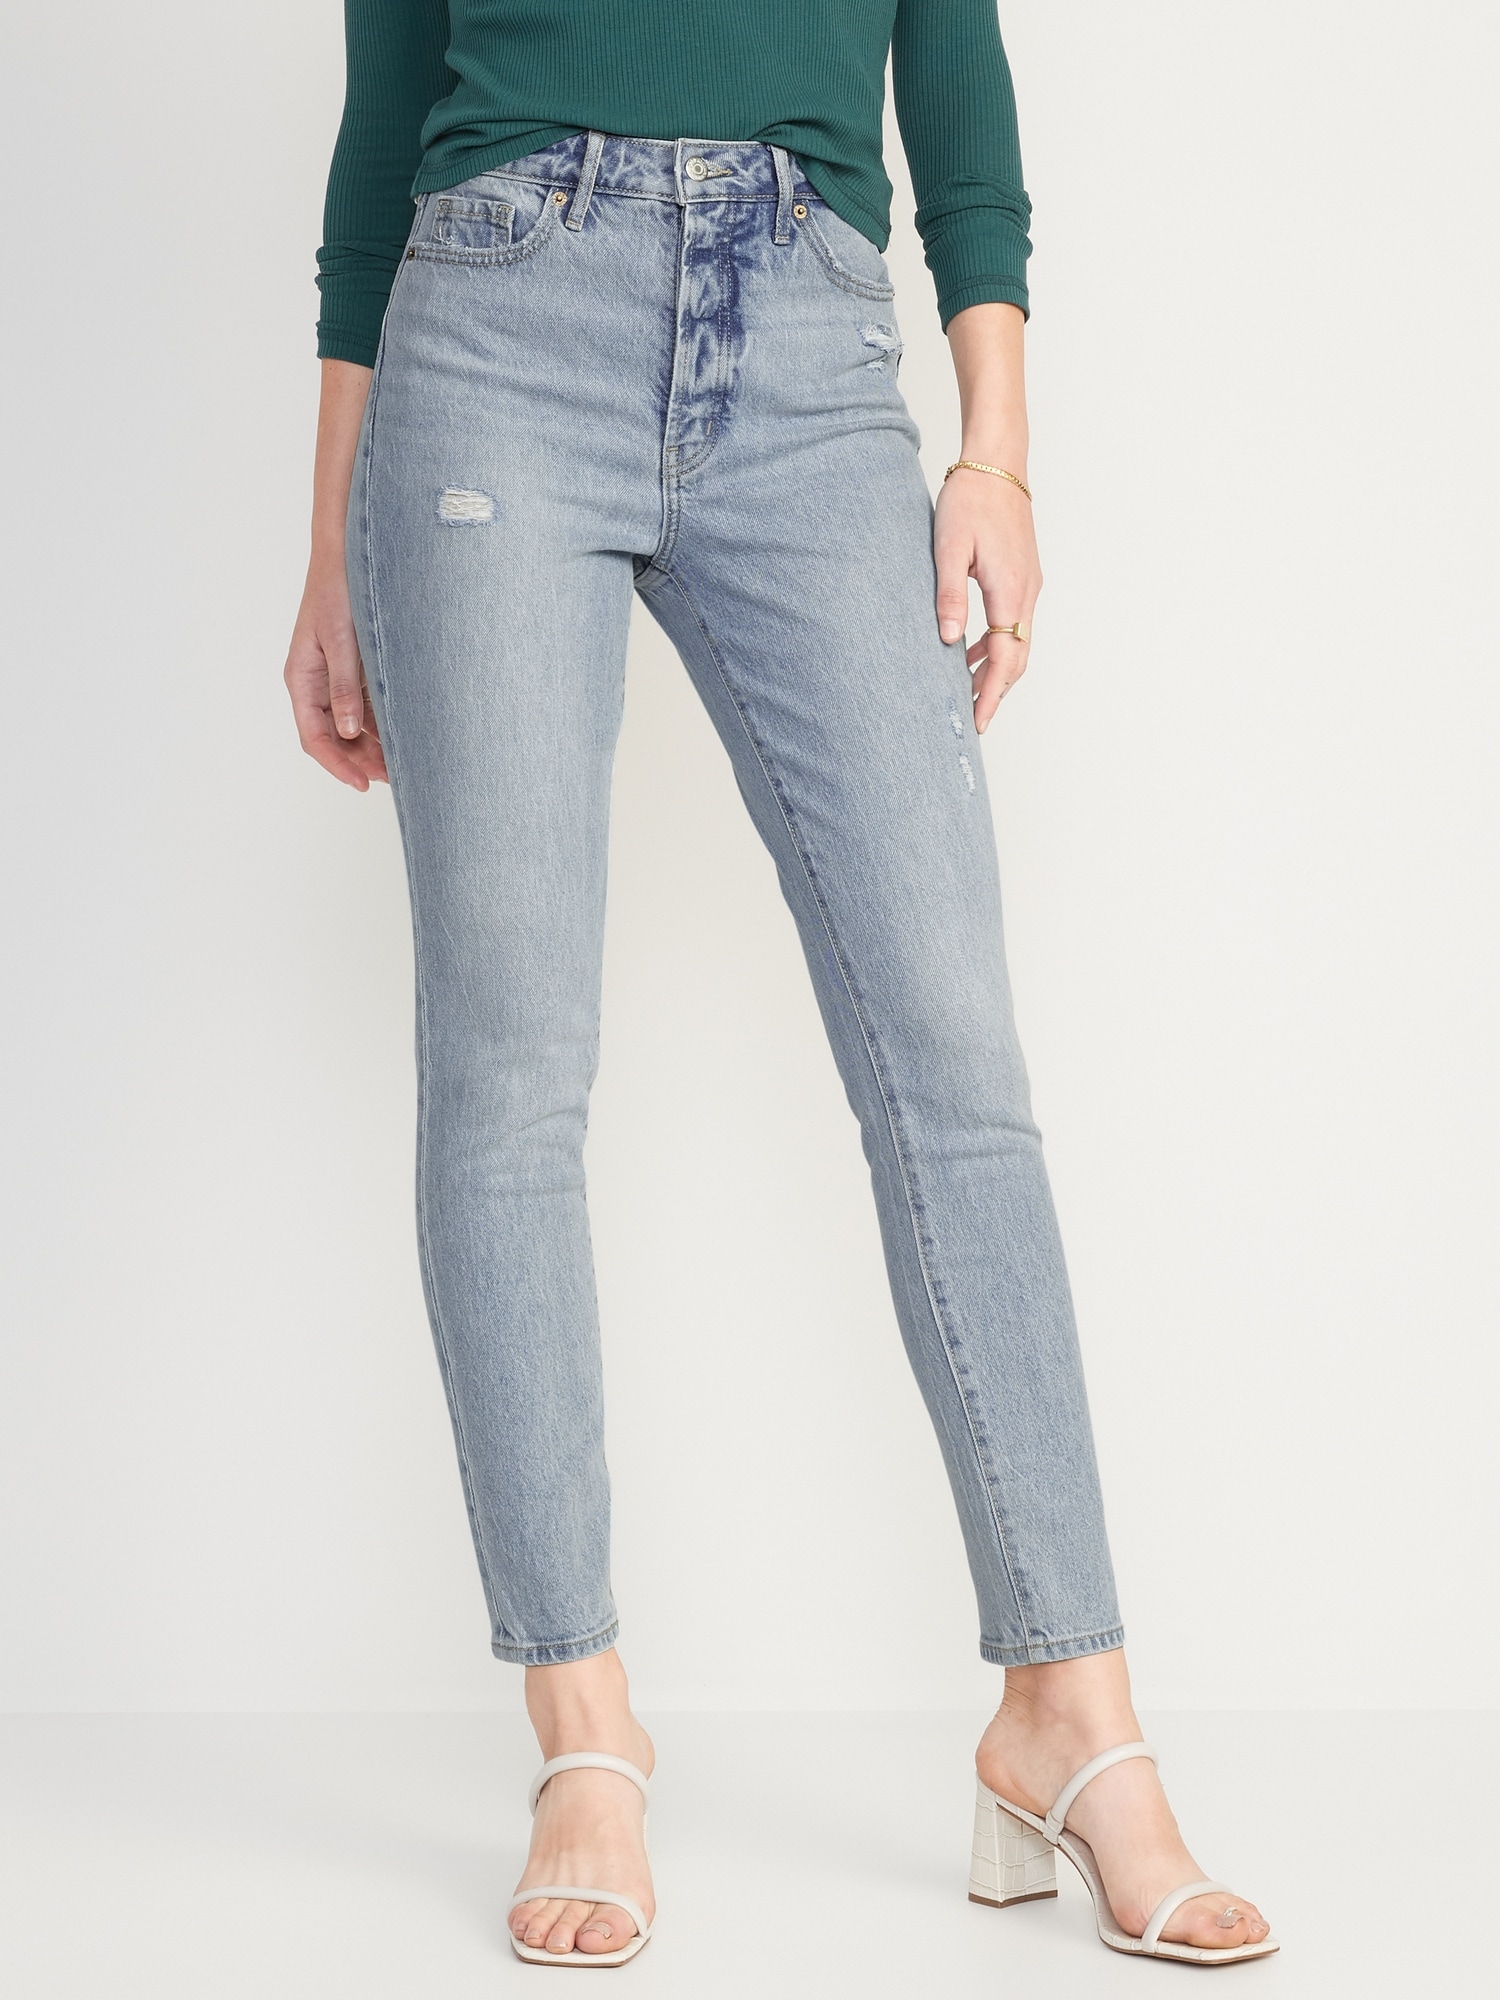 Old Navy Extra High-Waisted Hidden Button-Fly Pop Icon Distressed Skinny Jeans for Women blue. 1